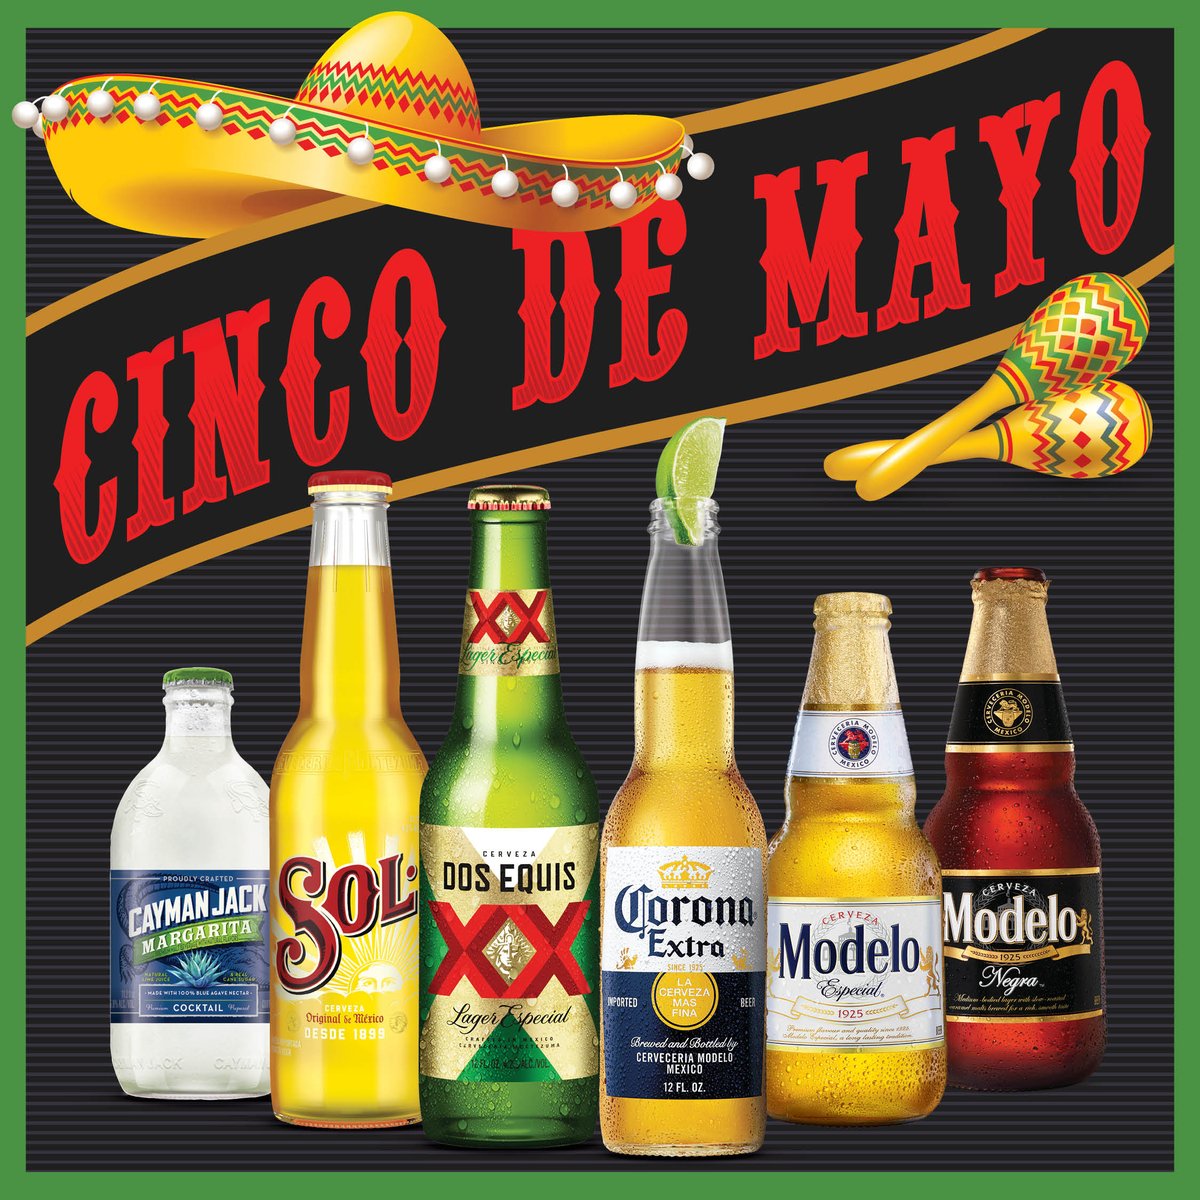 Ready to fiesta? We sure are! Our fridges are stocked with these delicious Mexican drinks, and yours should be too! What's your go-to brew to celebrate Cinco de Mayo? 🍺